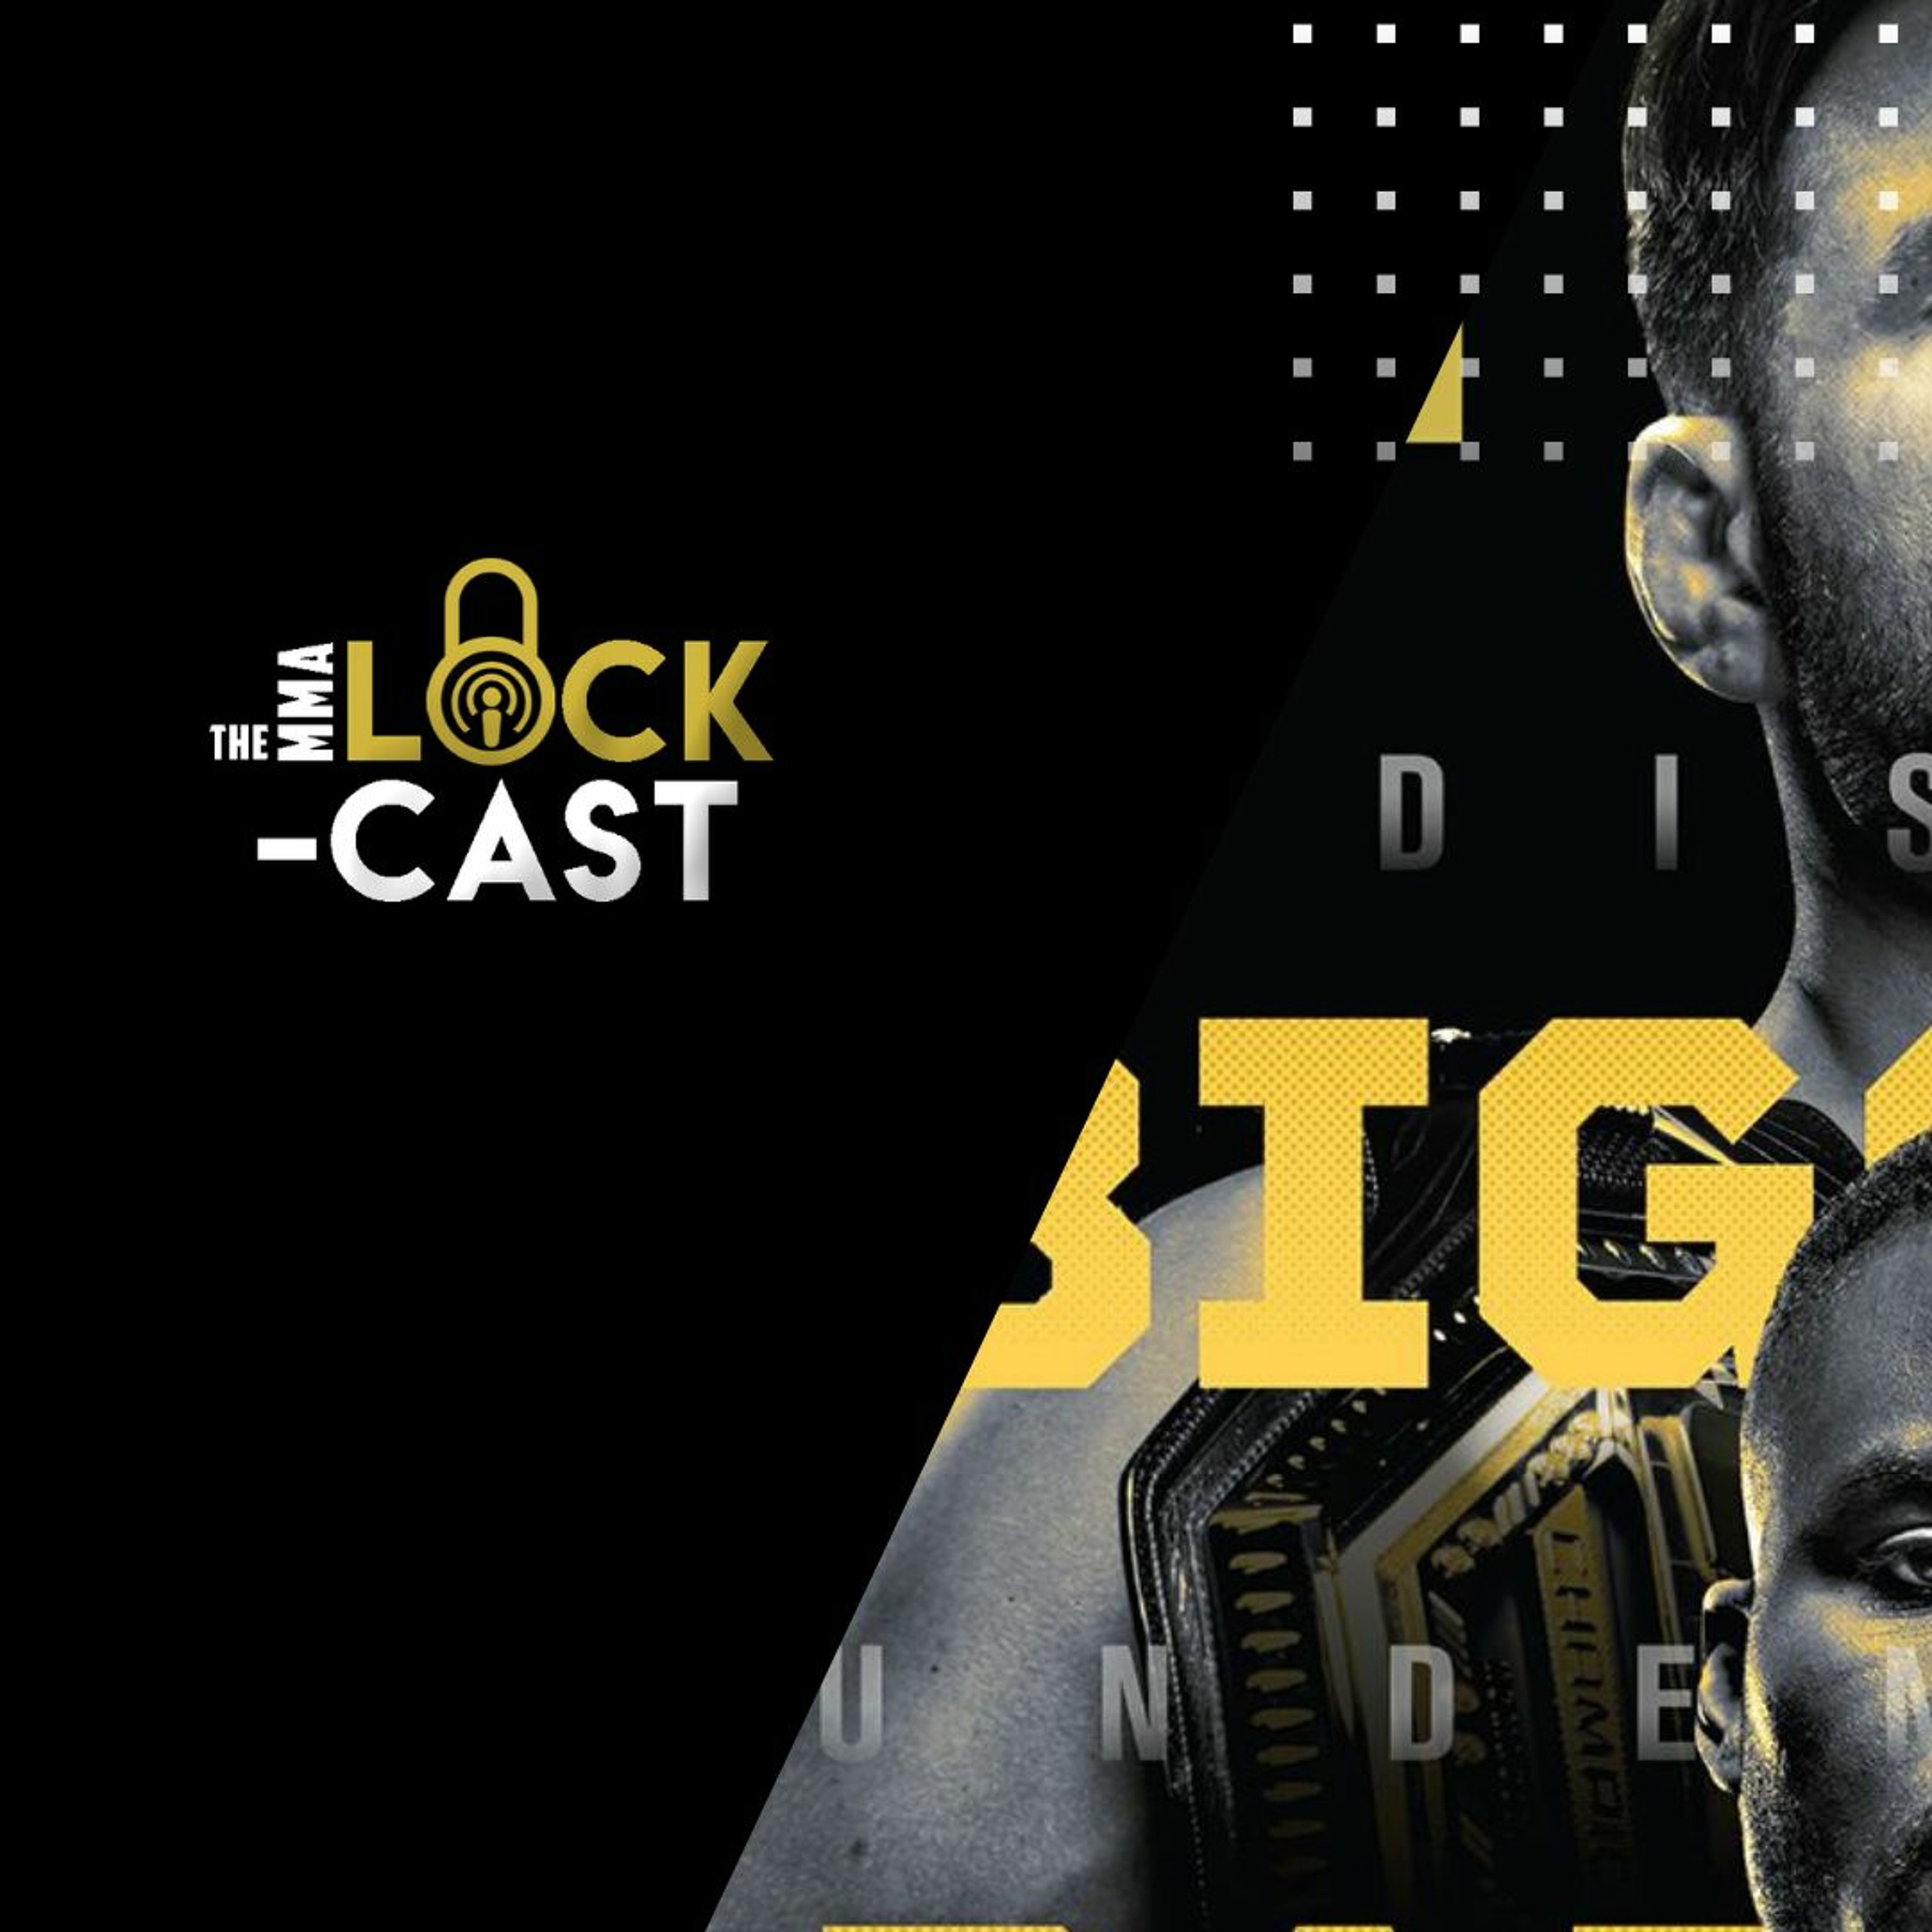 UFC 260: Miocic vs Ngannou 2 Predictions & Betting Tips | The MMA Lock-Cast Episode #119